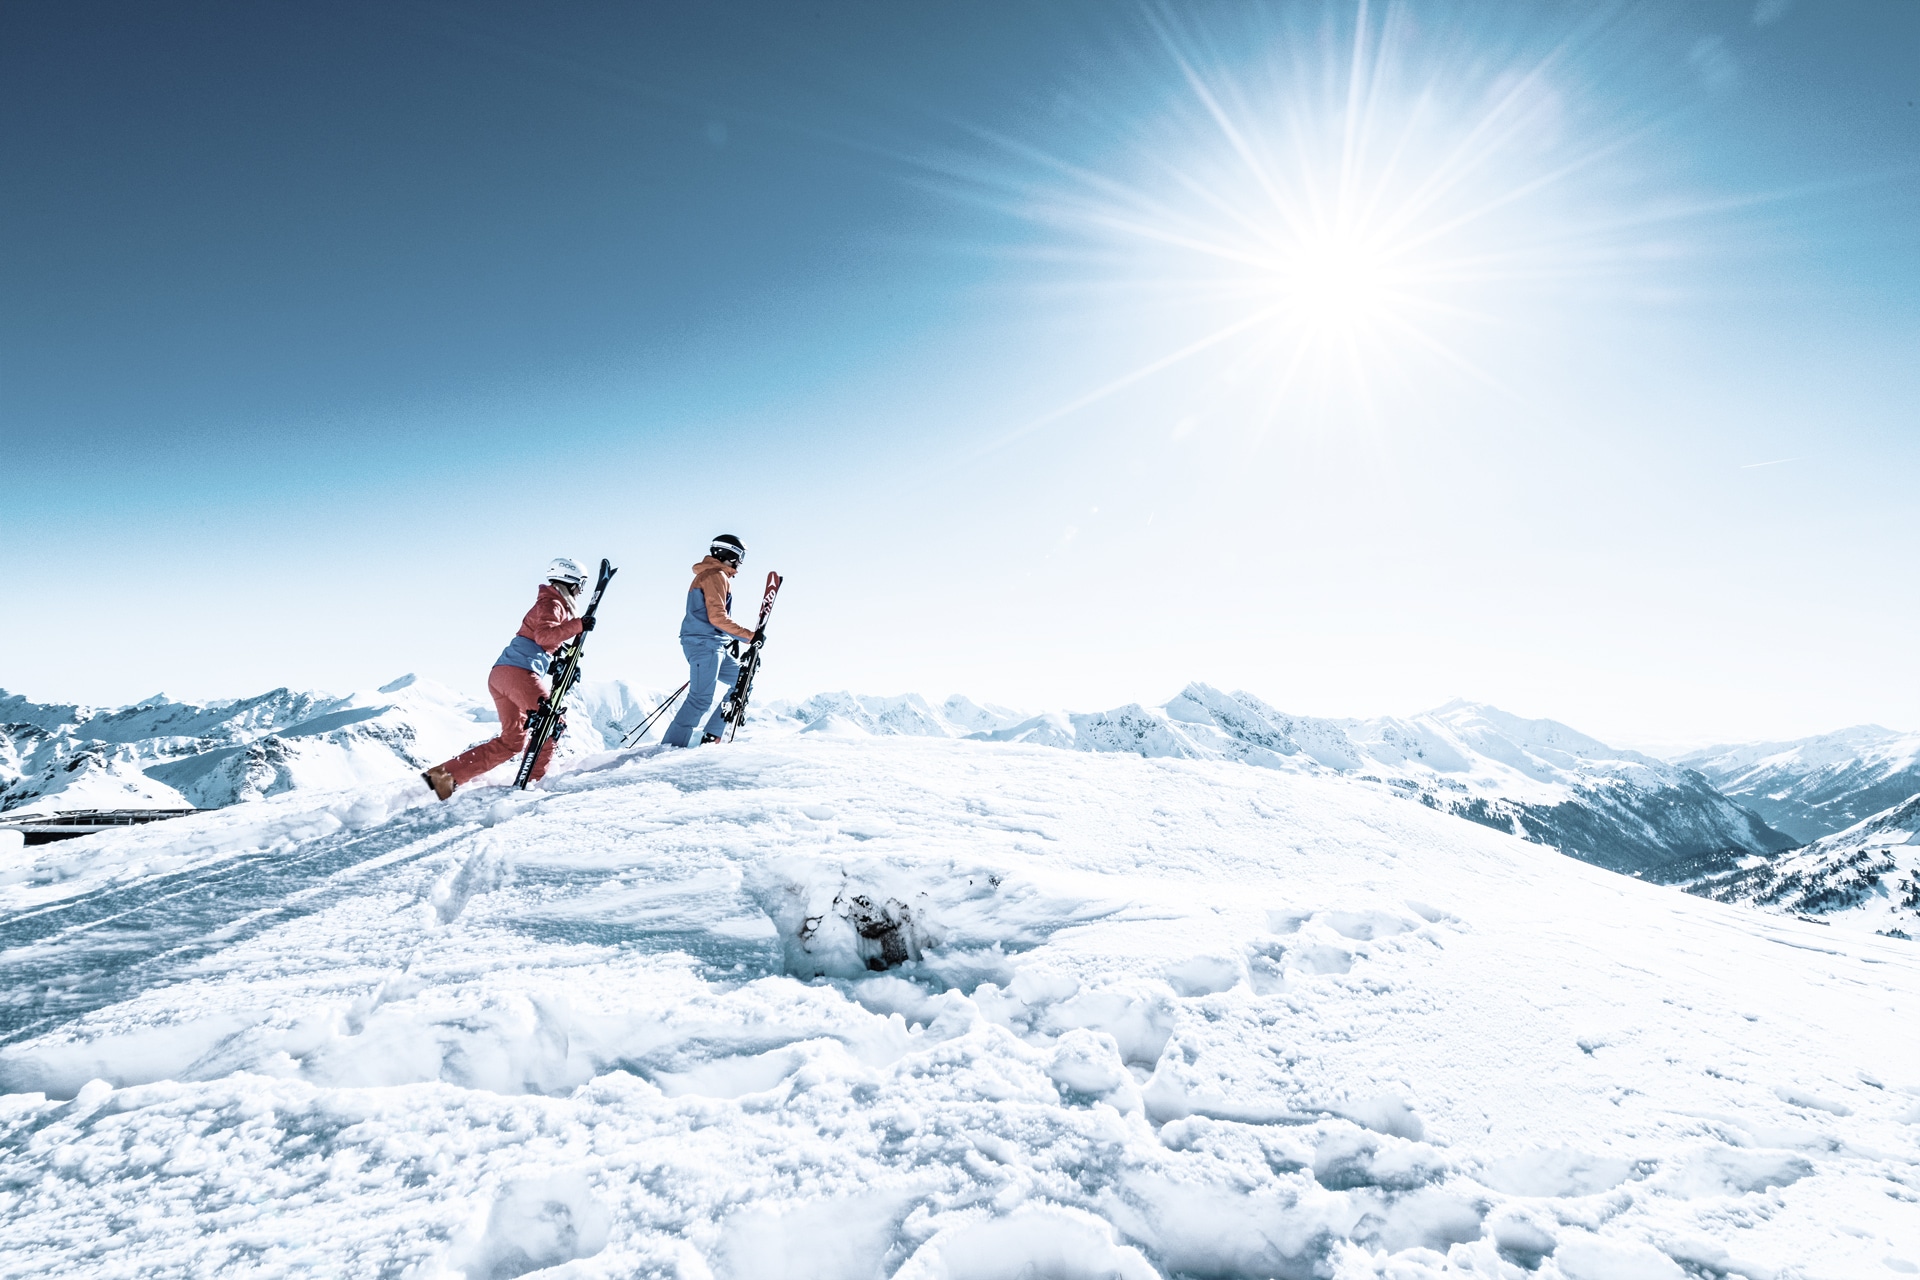 Two skiers on a snowy mountain peak with clear blue skies, basking in the radiant sunlight while preparing for an exhilarating descent.